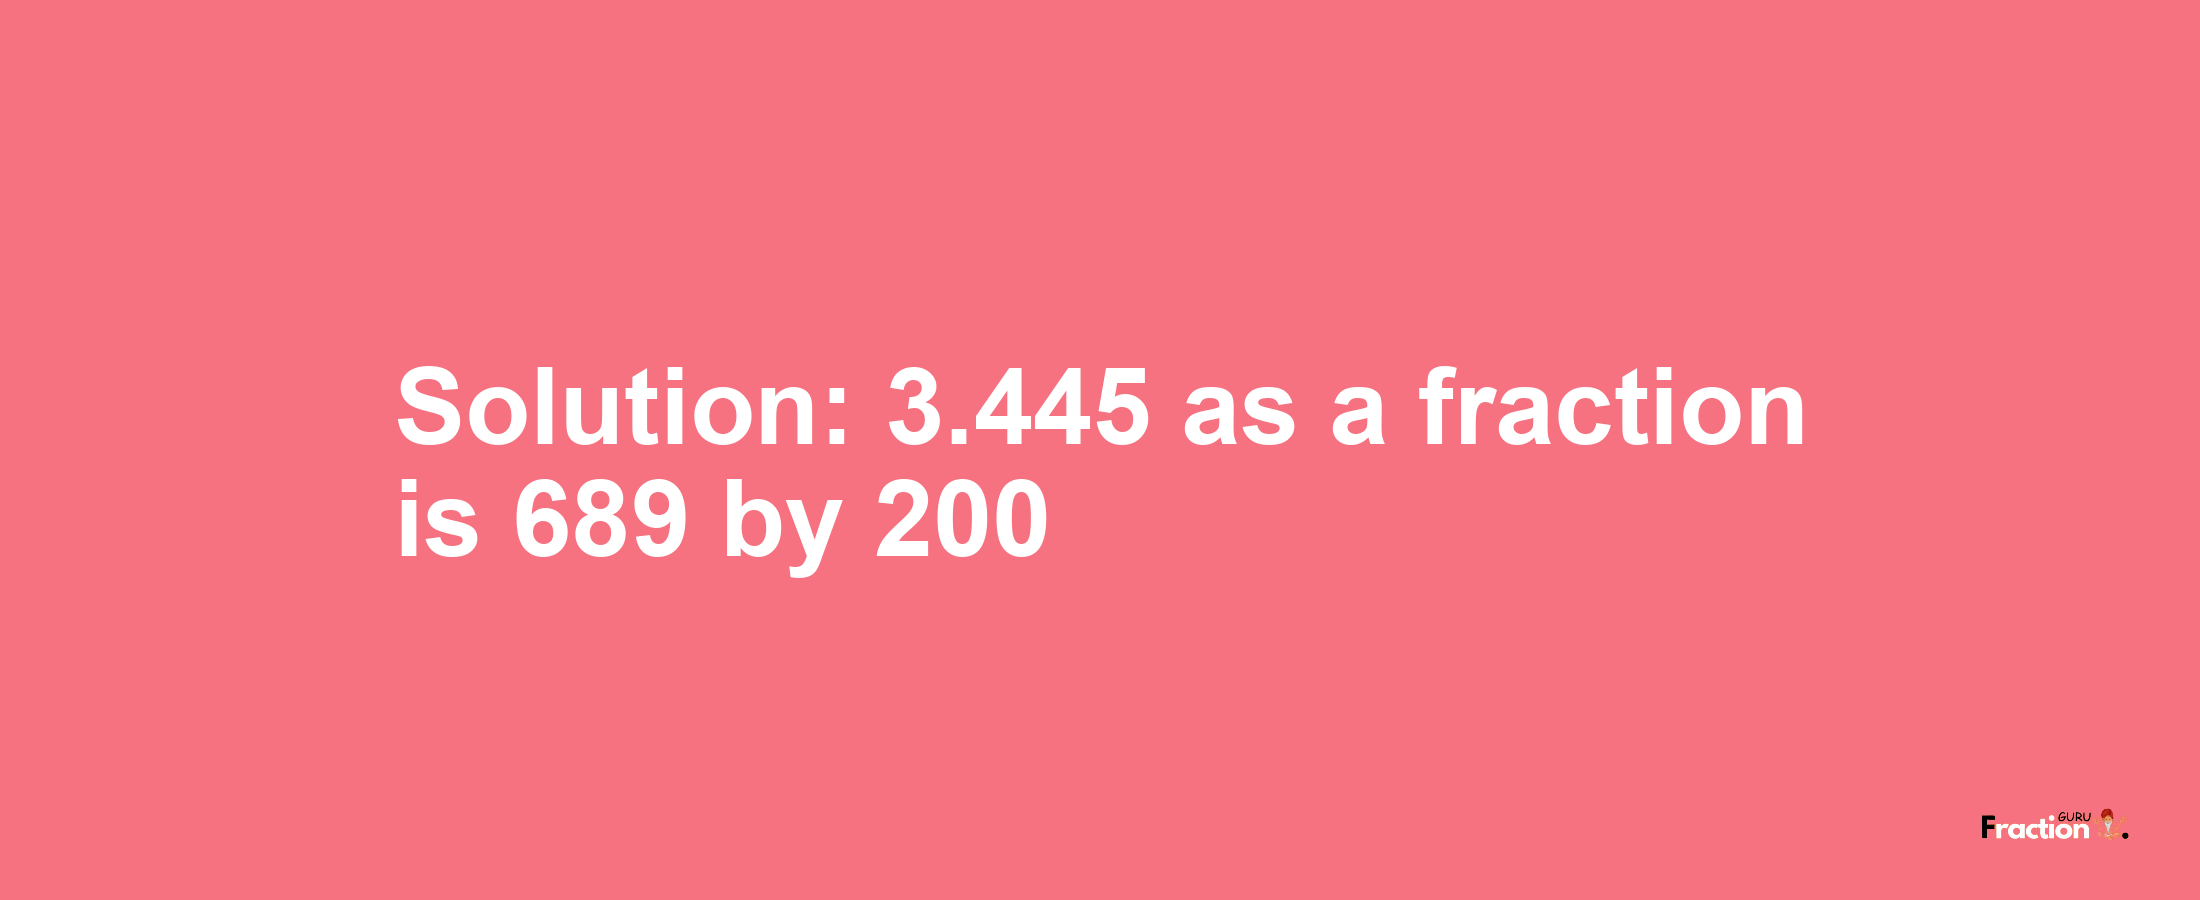 Solution:3.445 as a fraction is 689/200